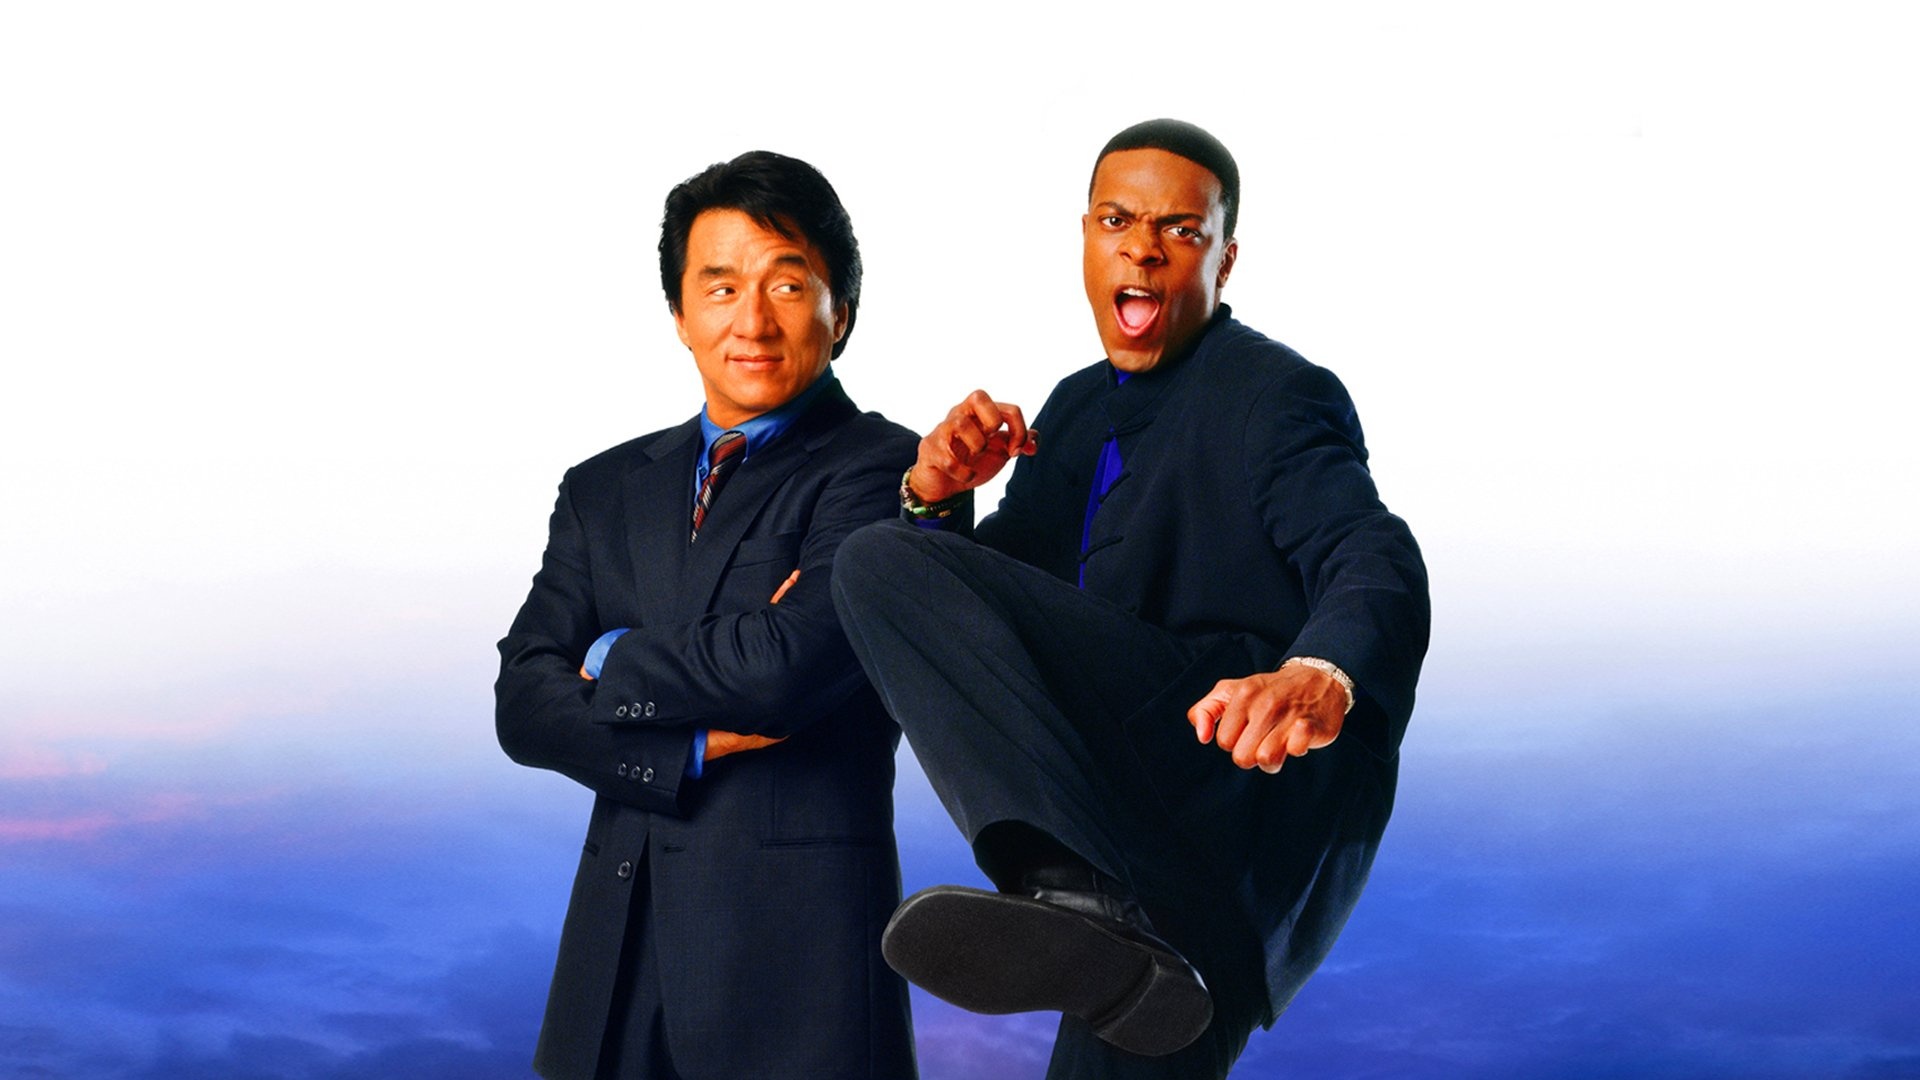 Rush Hour 4, Release date, Plot rumors, Exciting expectations, 1920x1080 Full HD Desktop